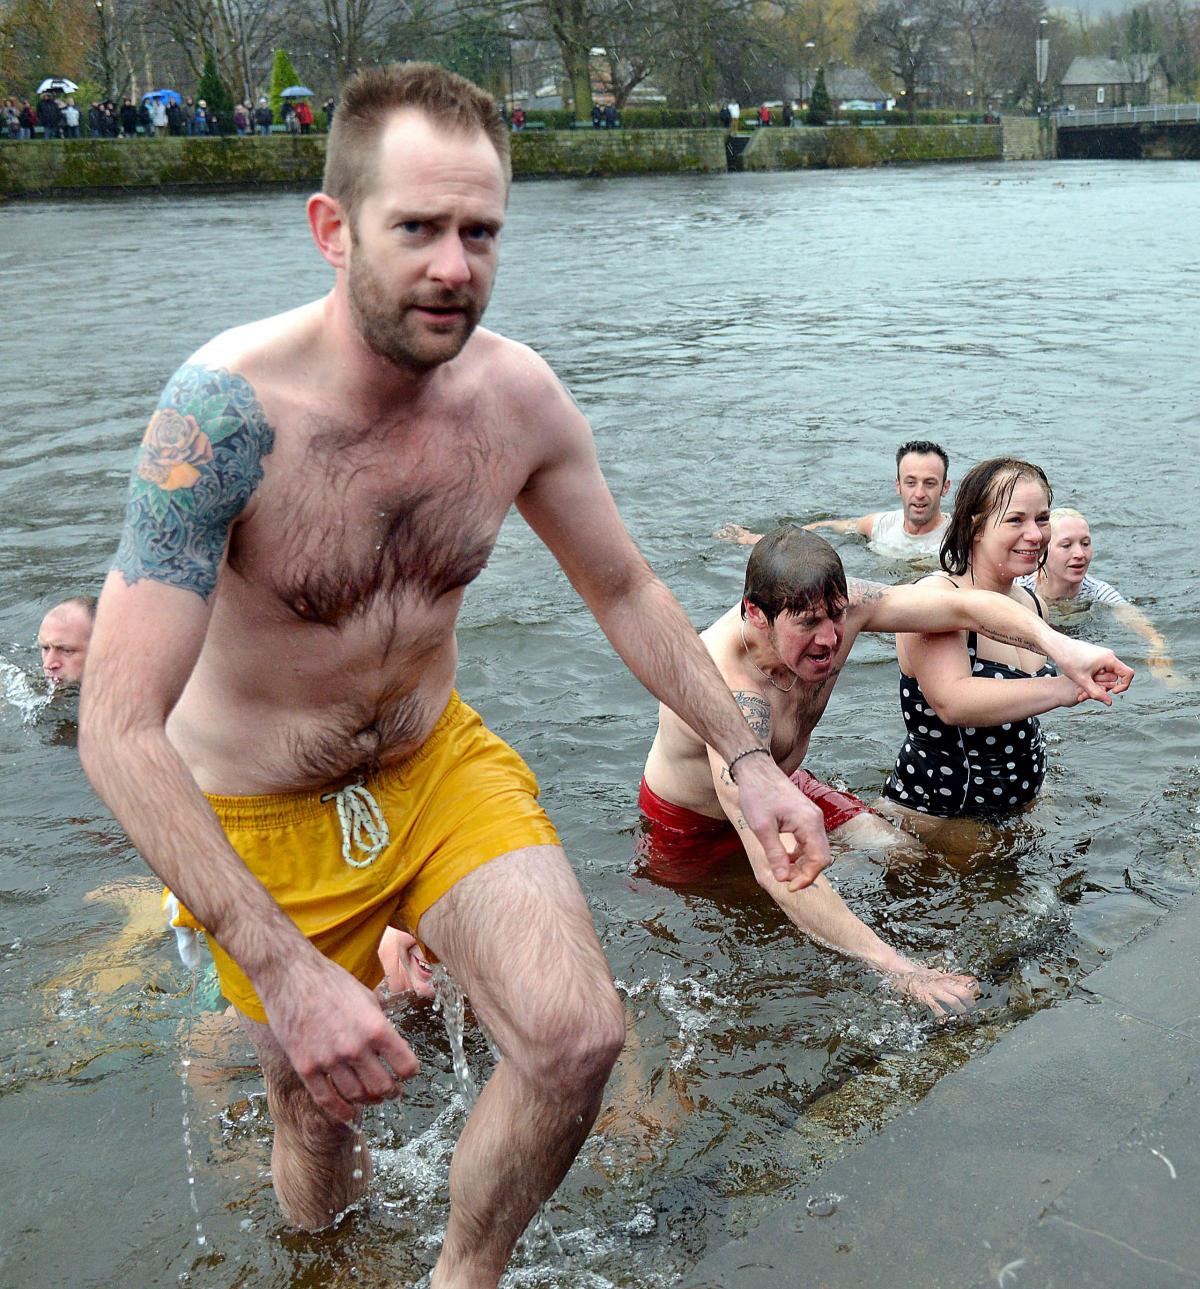 Swimmers leaving the River Wharfe in Otley after the chilly traditional New Year’s Day dip 